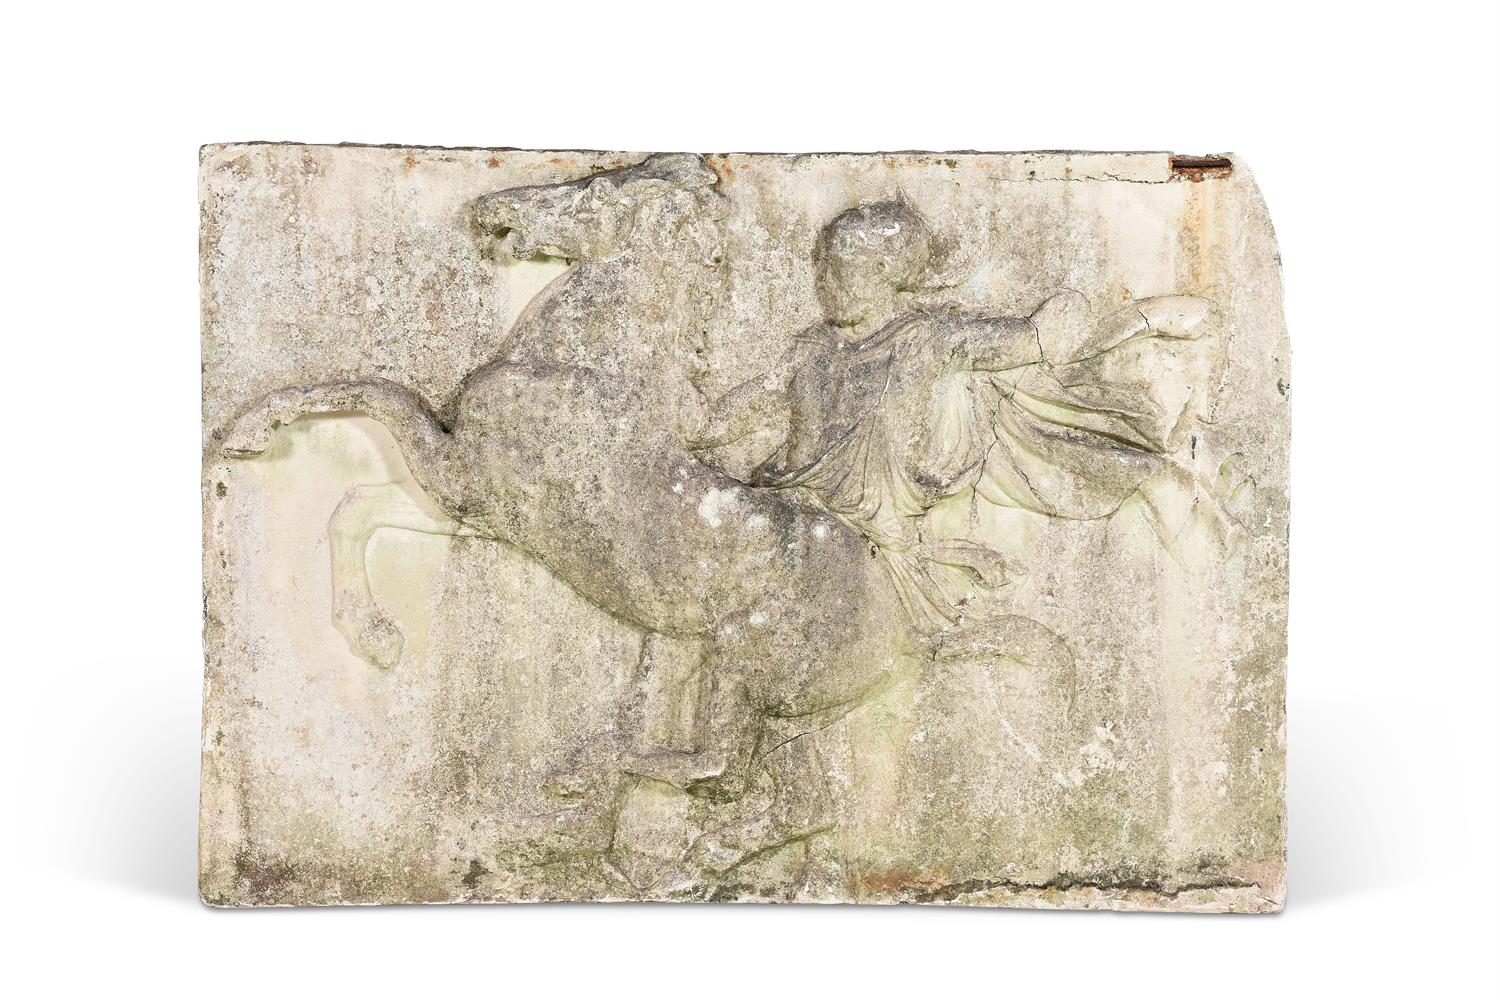 A FAUX MARBLE PANEL DEPICTING HORSEMAN FROM THE PARTHENON FRIEZE, 20TH CENTURY